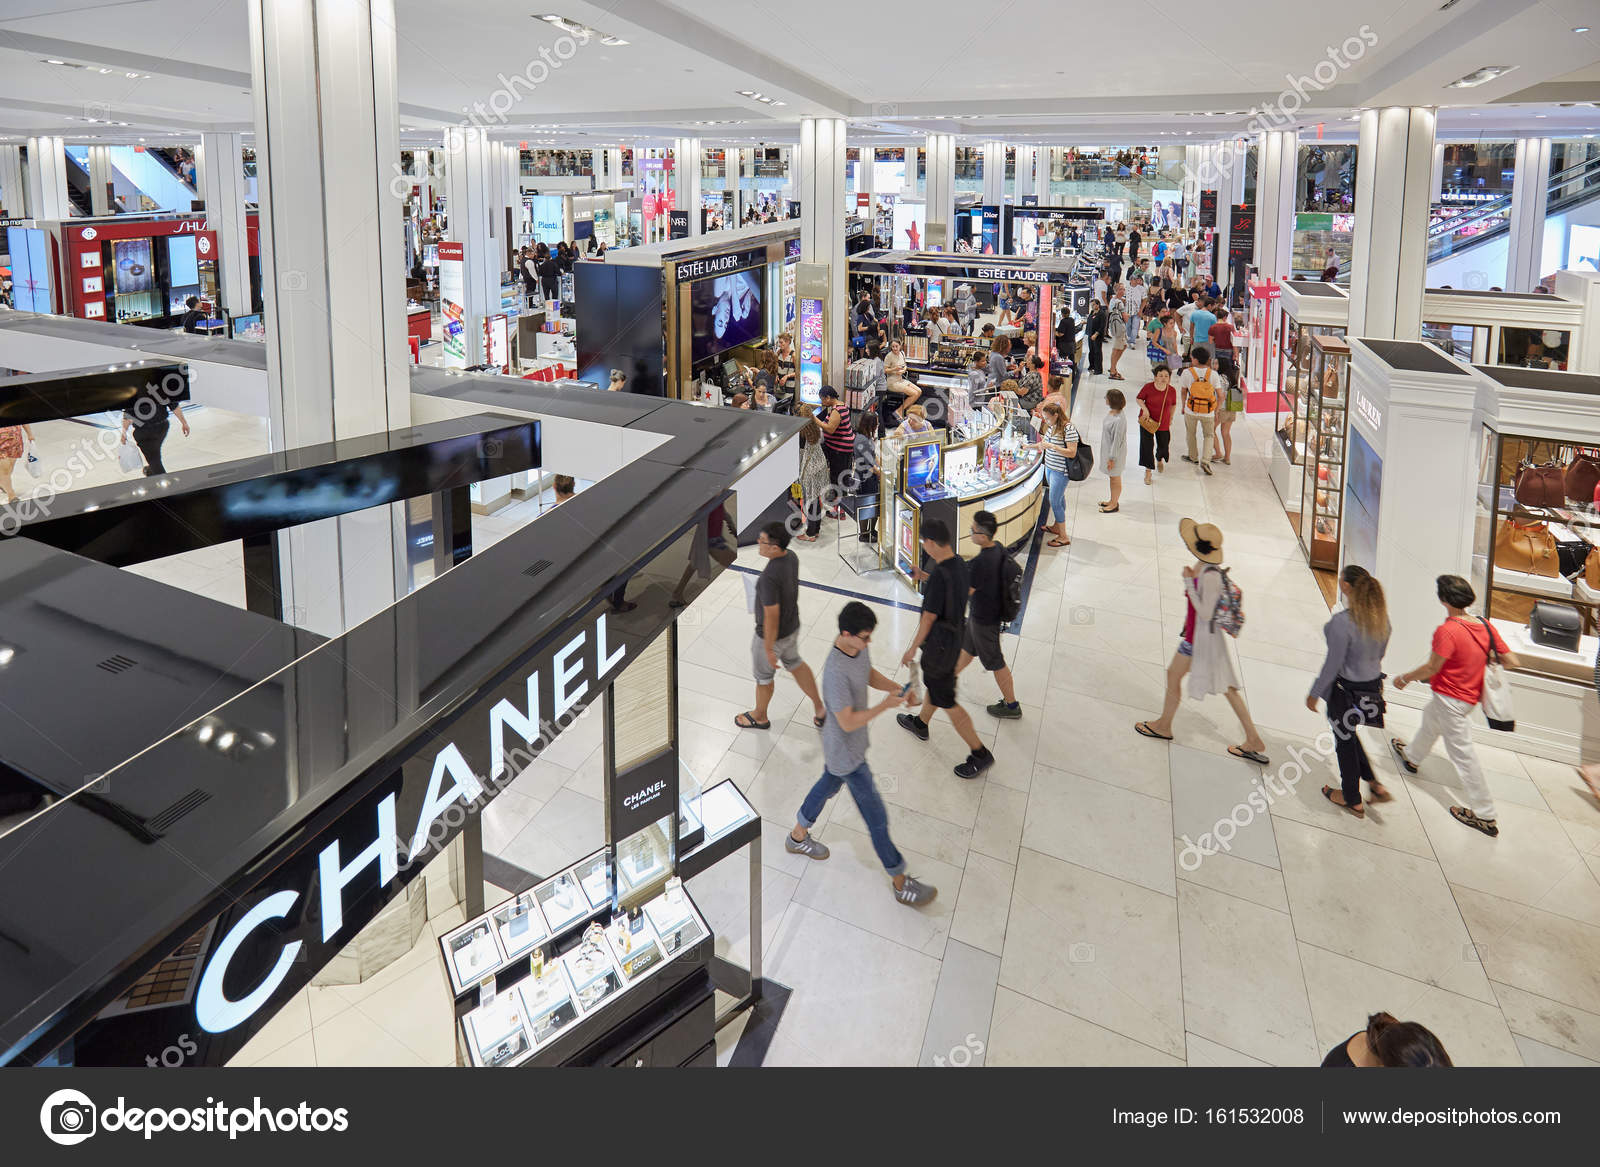 Macy's department store interior, cosmetics area with Chanel shop